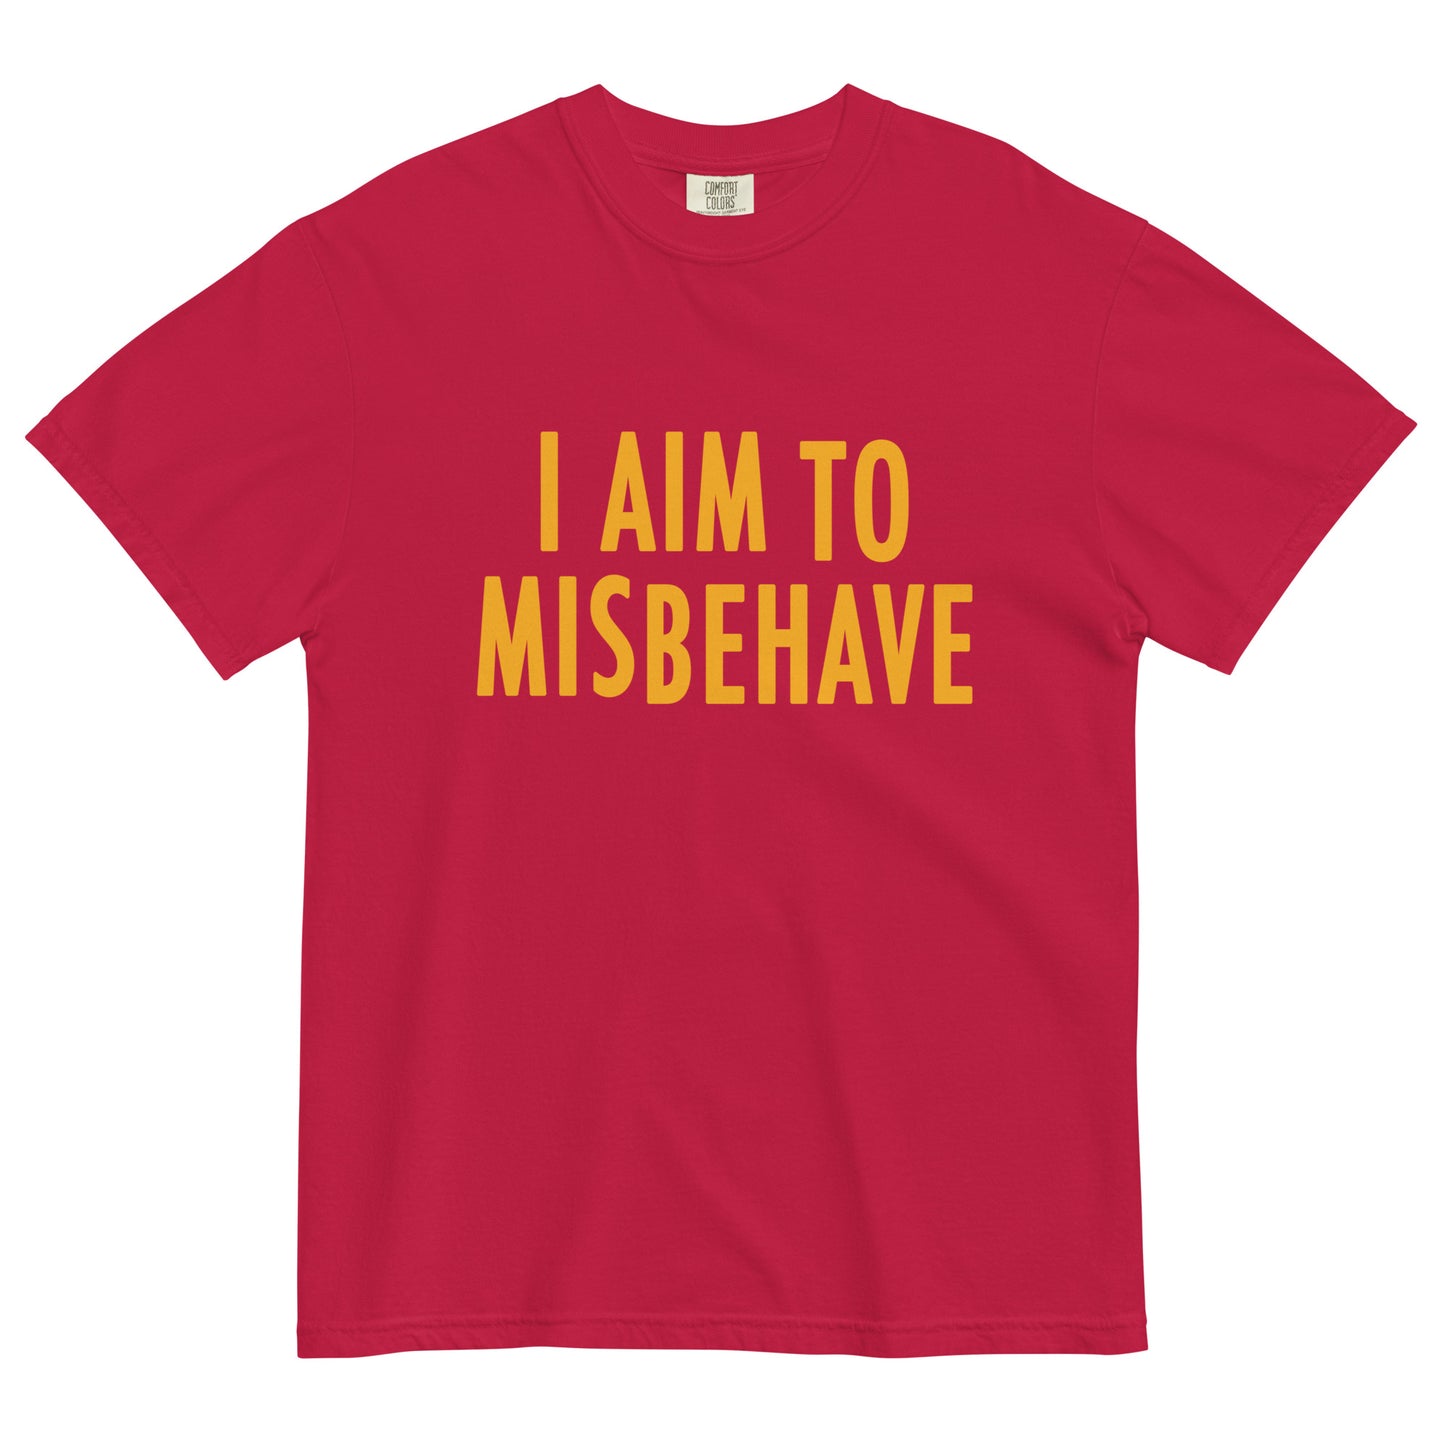 I Aim To Misbehave Men's Relaxed Fit Tee